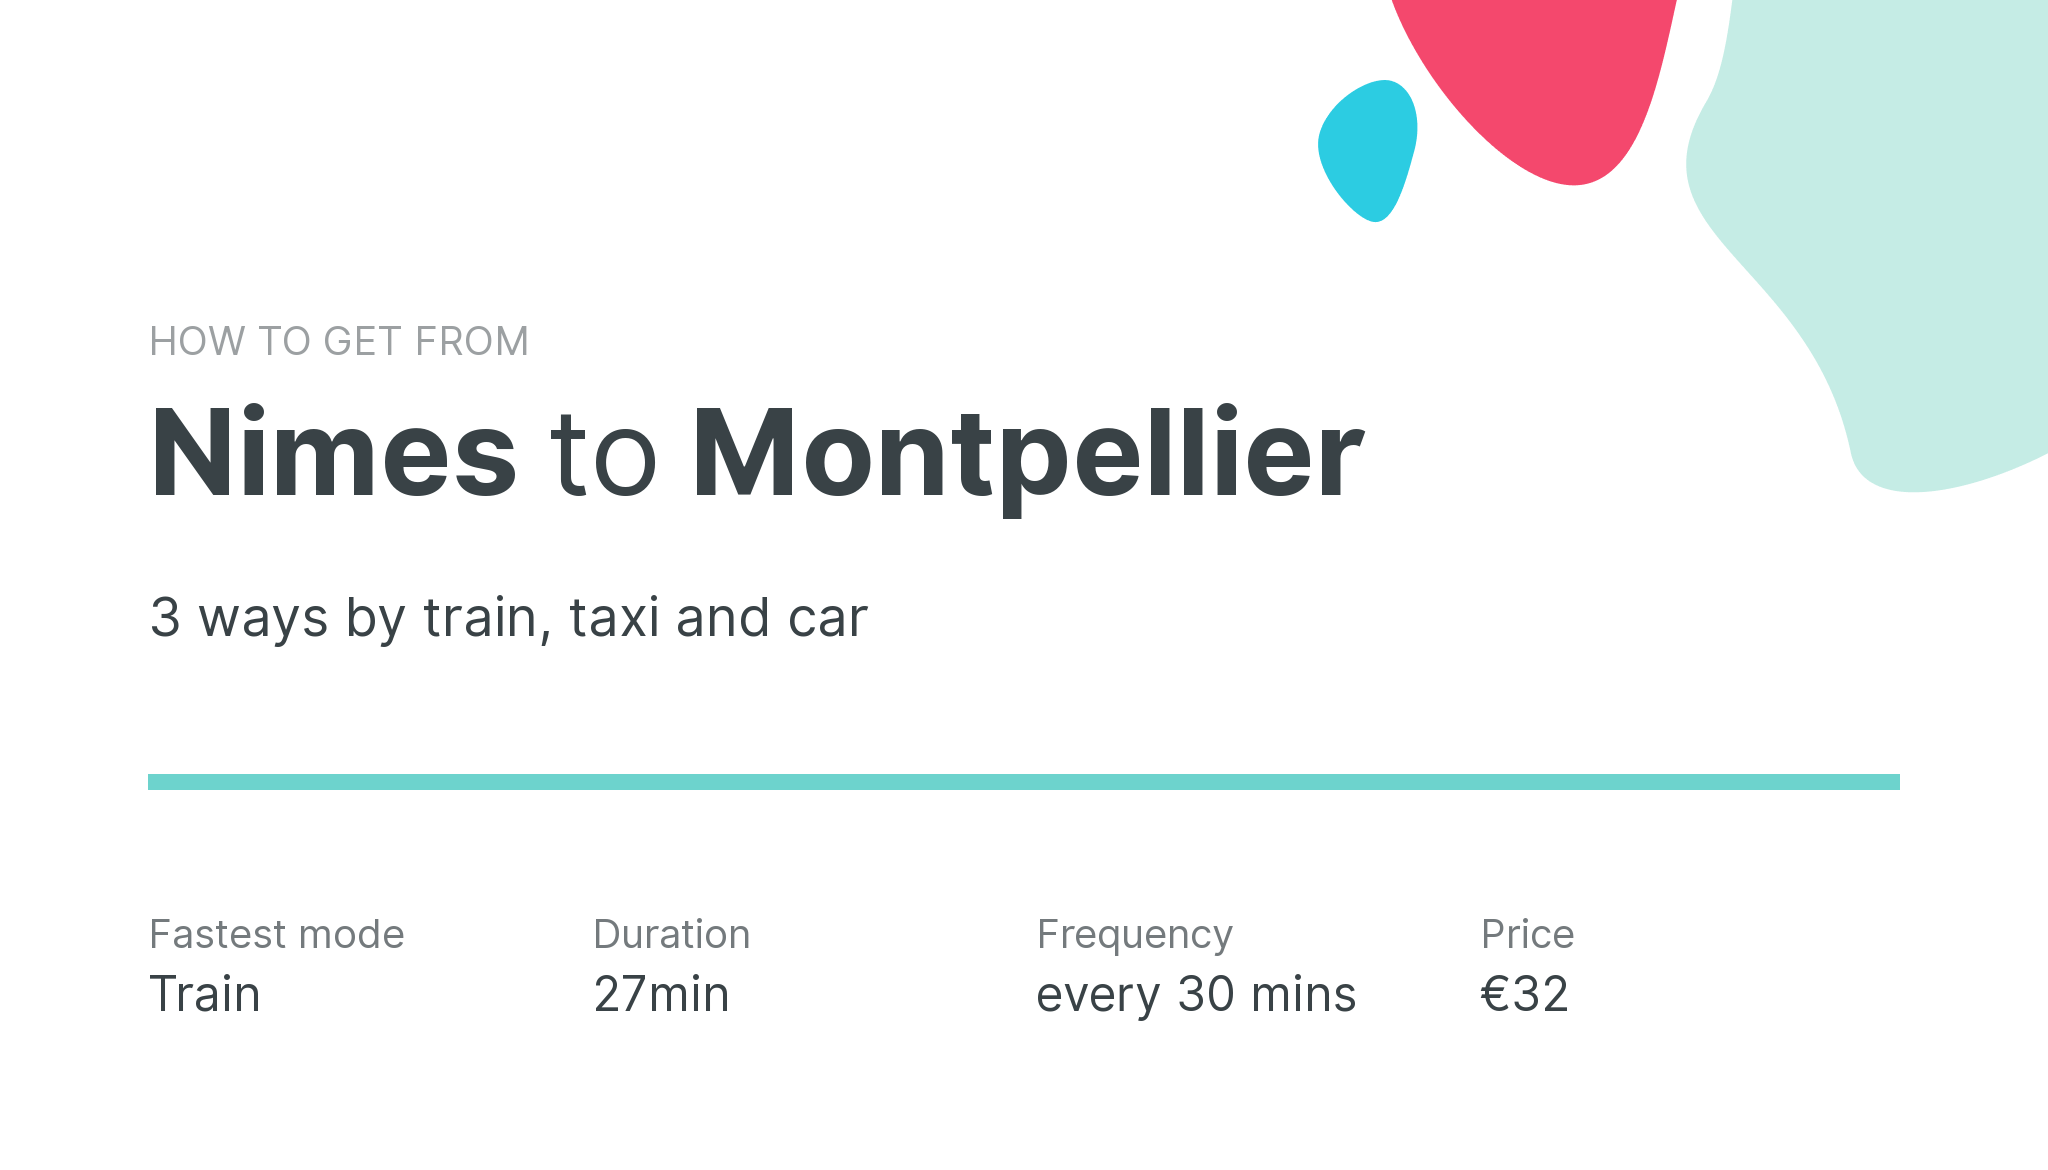 How do I get from Nimes to Montpellier